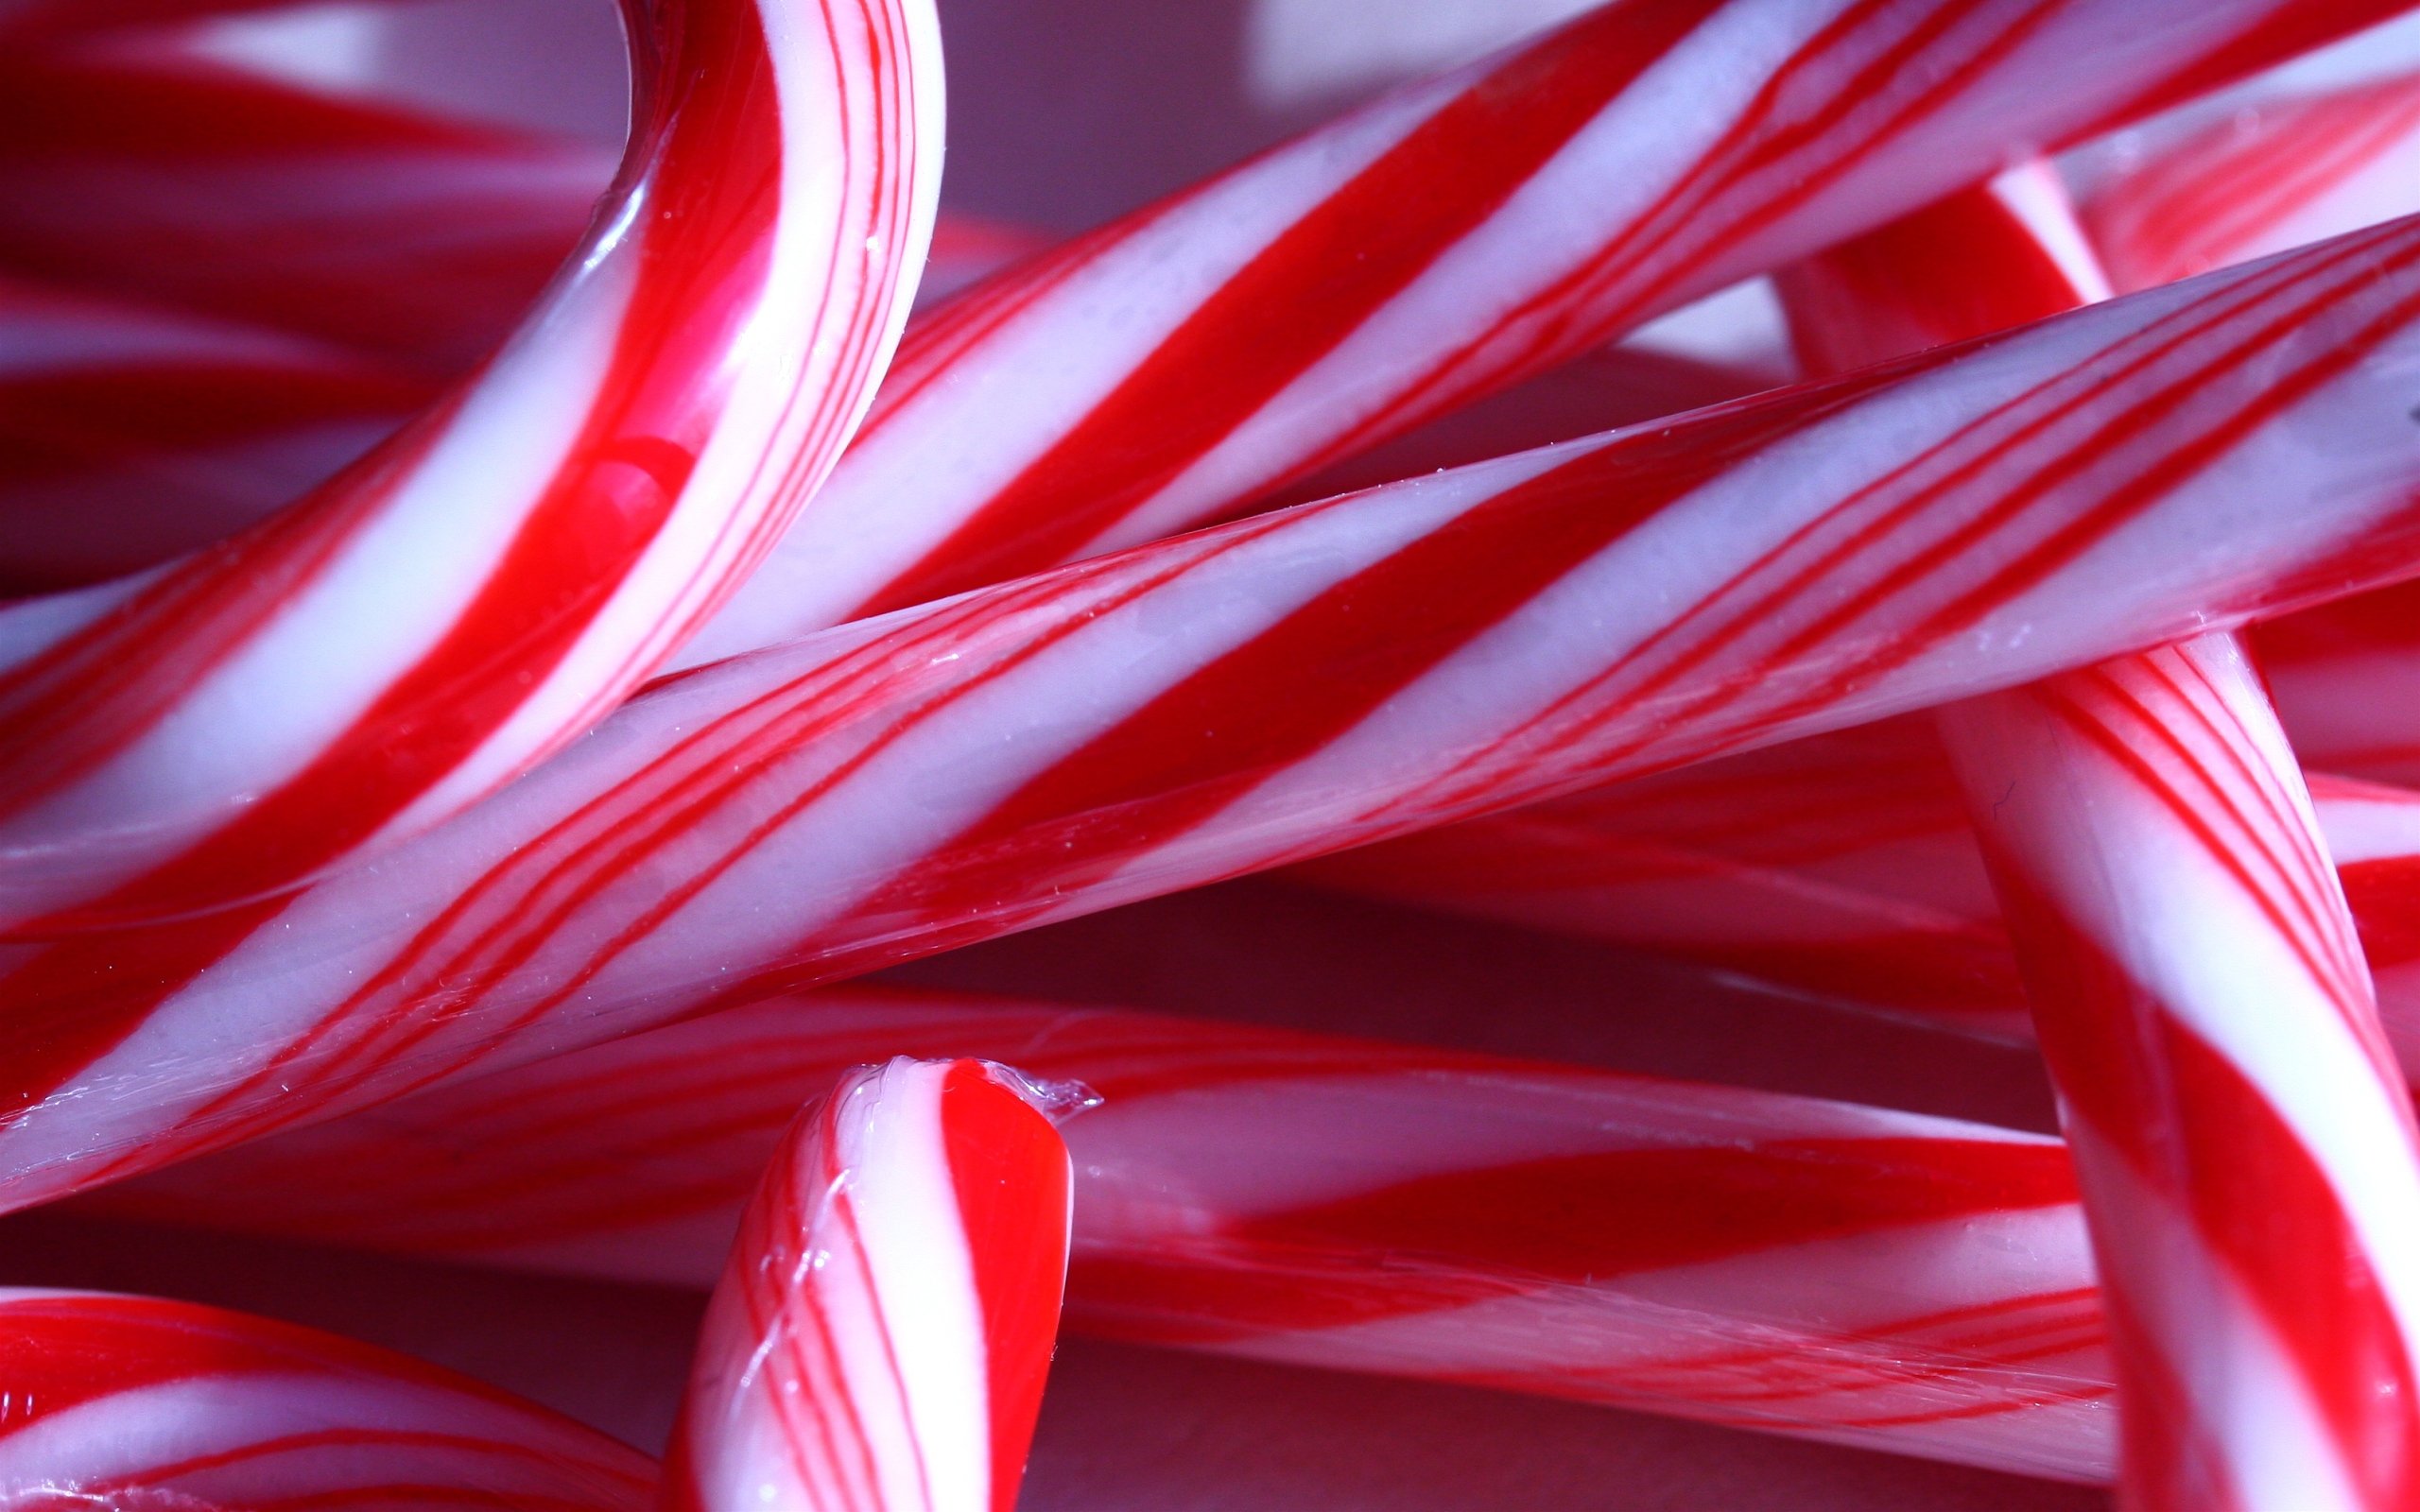 Candy canes candies wallpaper 2560x1600 258658